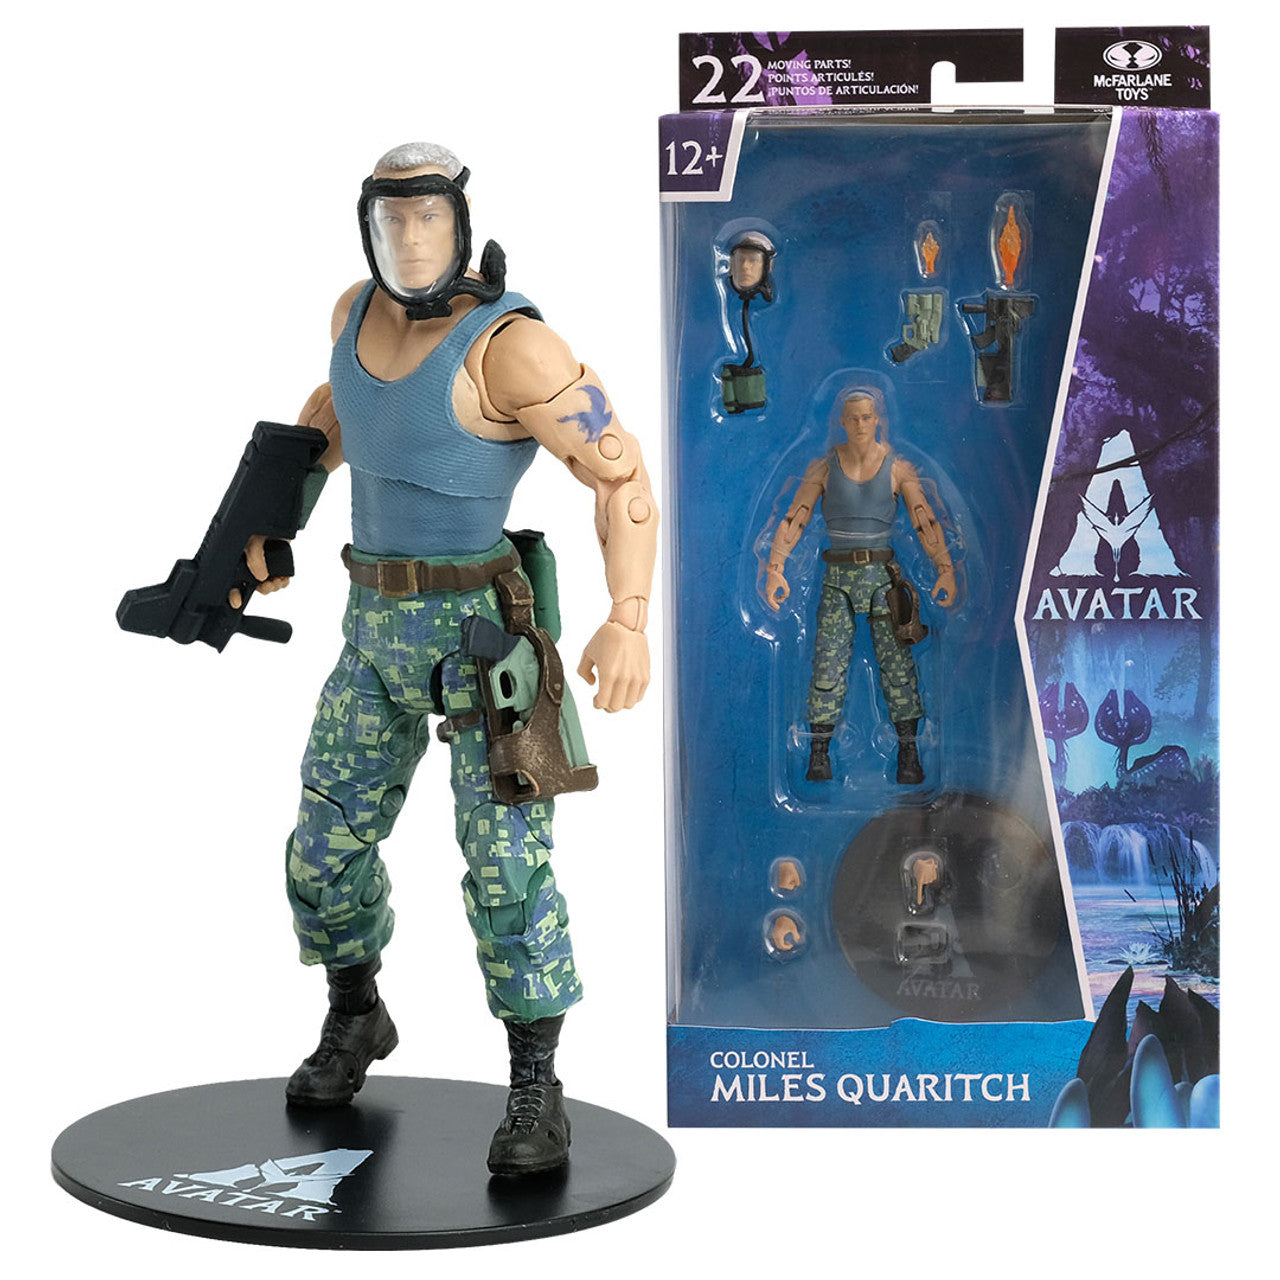 Avatar Colonel Miles Quaritch By McFarlane